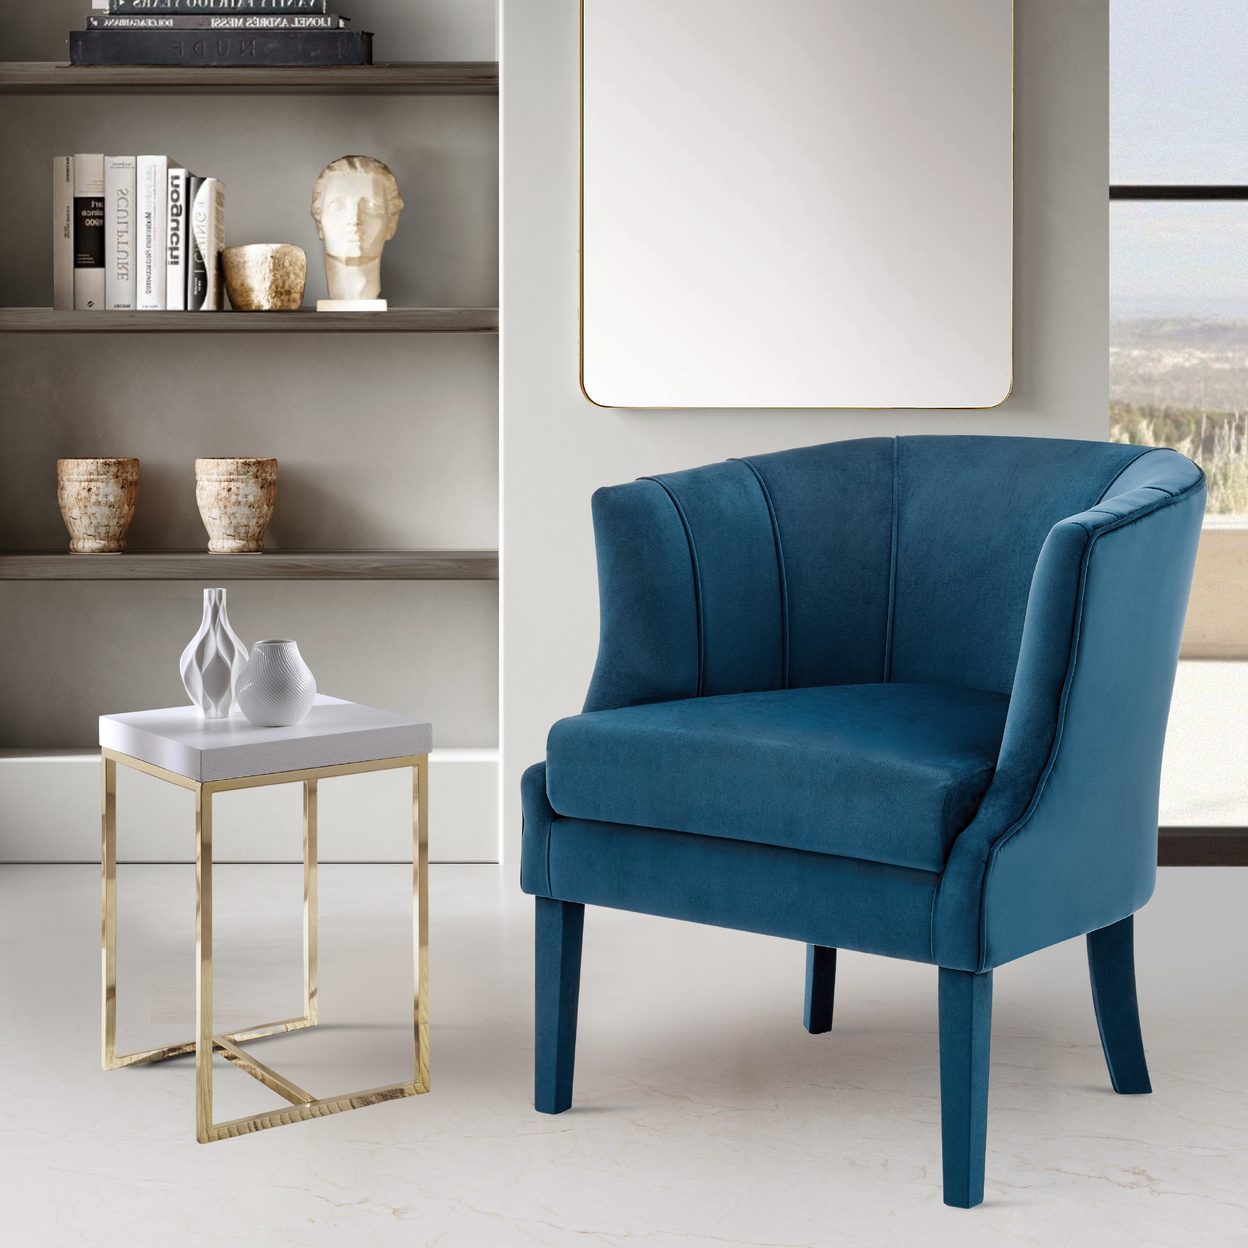 Iconic Home Layne Accent Chair Velvet Upholstered Vertical Channel Quilted Piped Stitching Barrel Back Design Upholstered Flared Legs - Navy